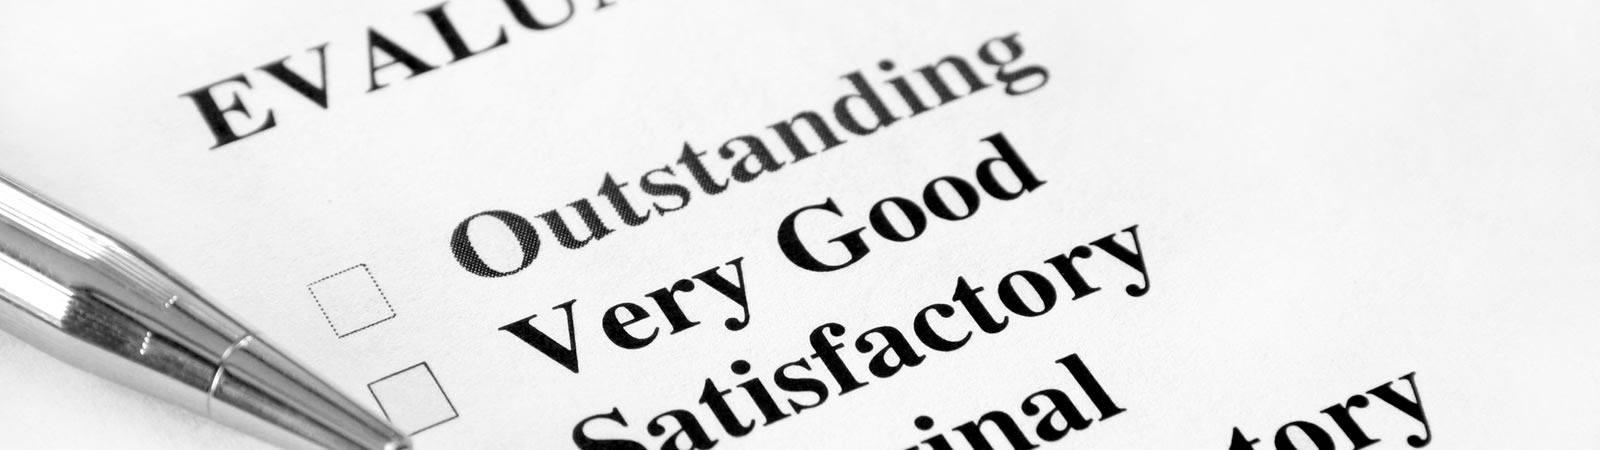 What makes a good evaluation?